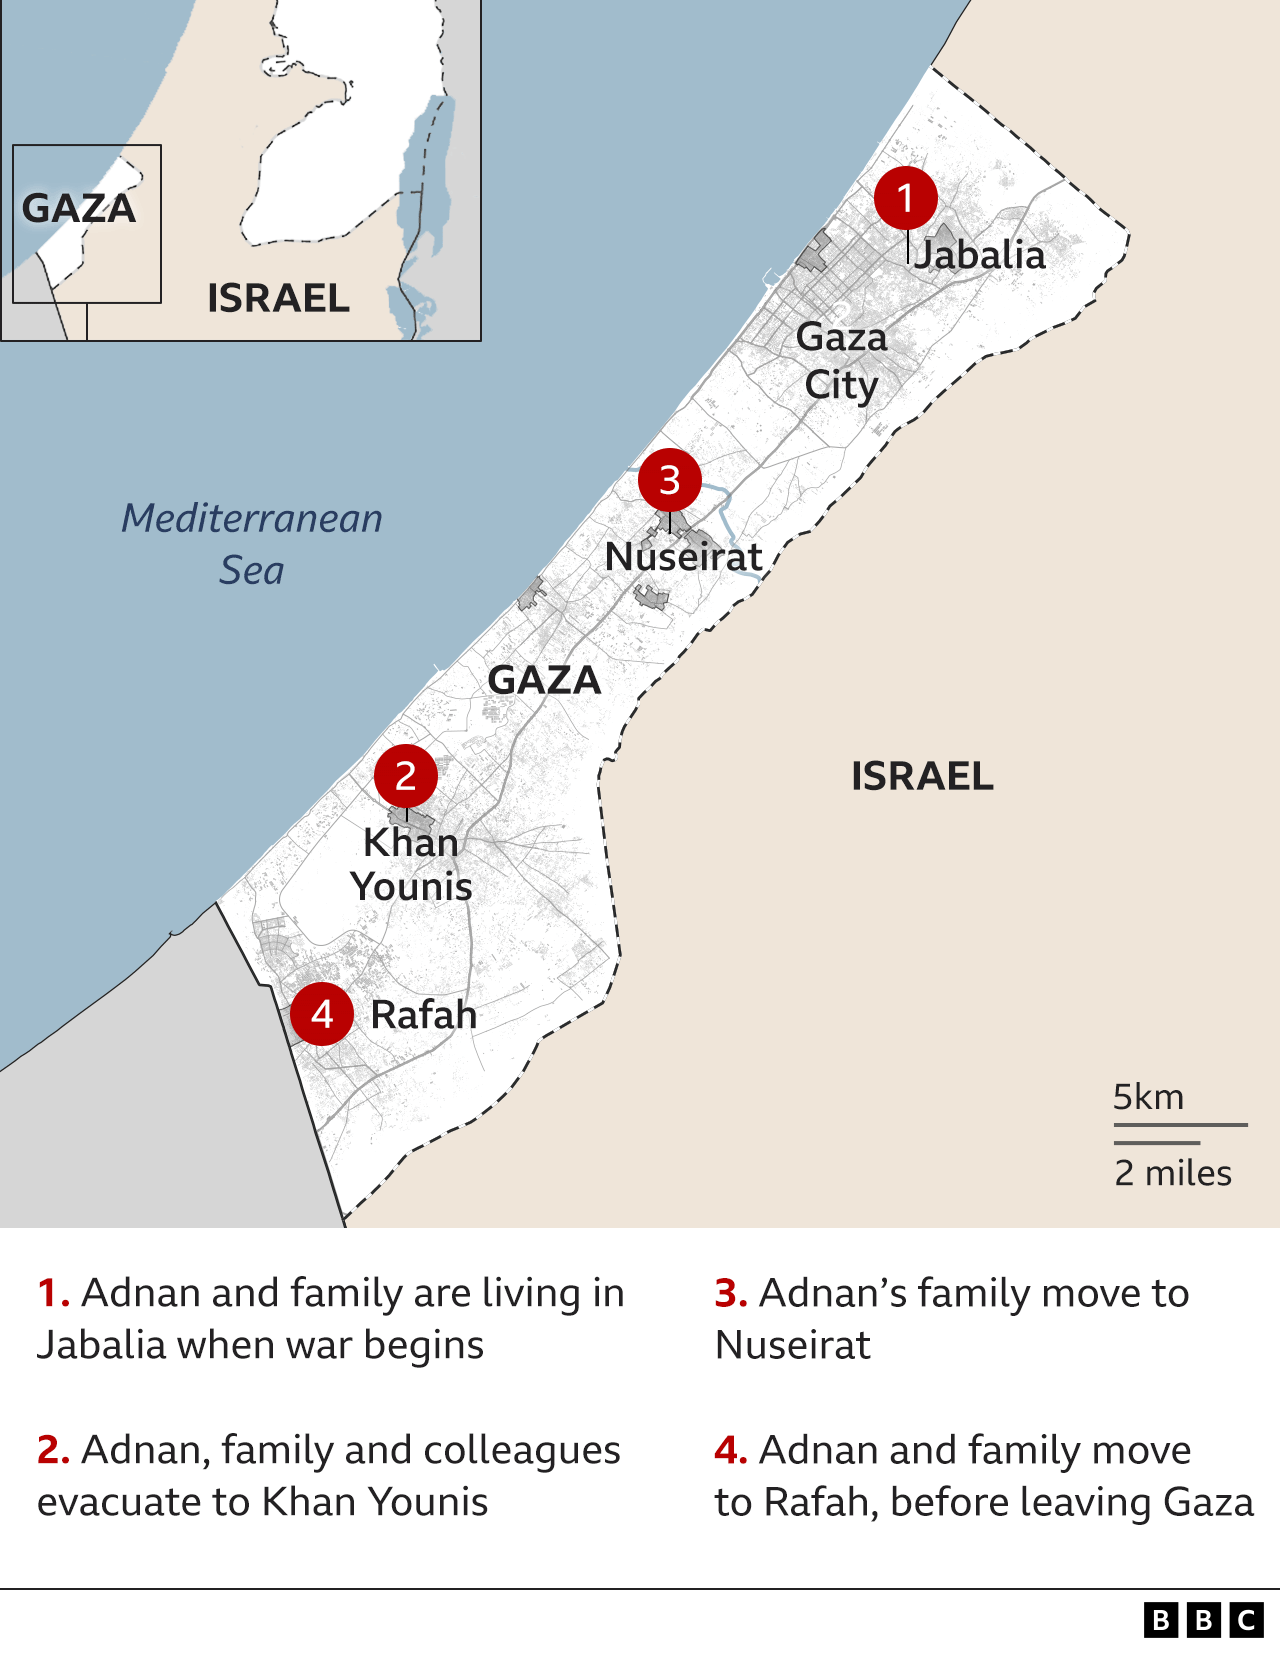 Map showing movements of Adnan and family during war: 1 Adnan and family are living in Jabalia when war begins, 2 Adnan, family and colleagues evacuate to Khan Younis, 3 Adnan's family move to Nuseirat, 4 Adnan and family move to Rafah, before leaving Gaza